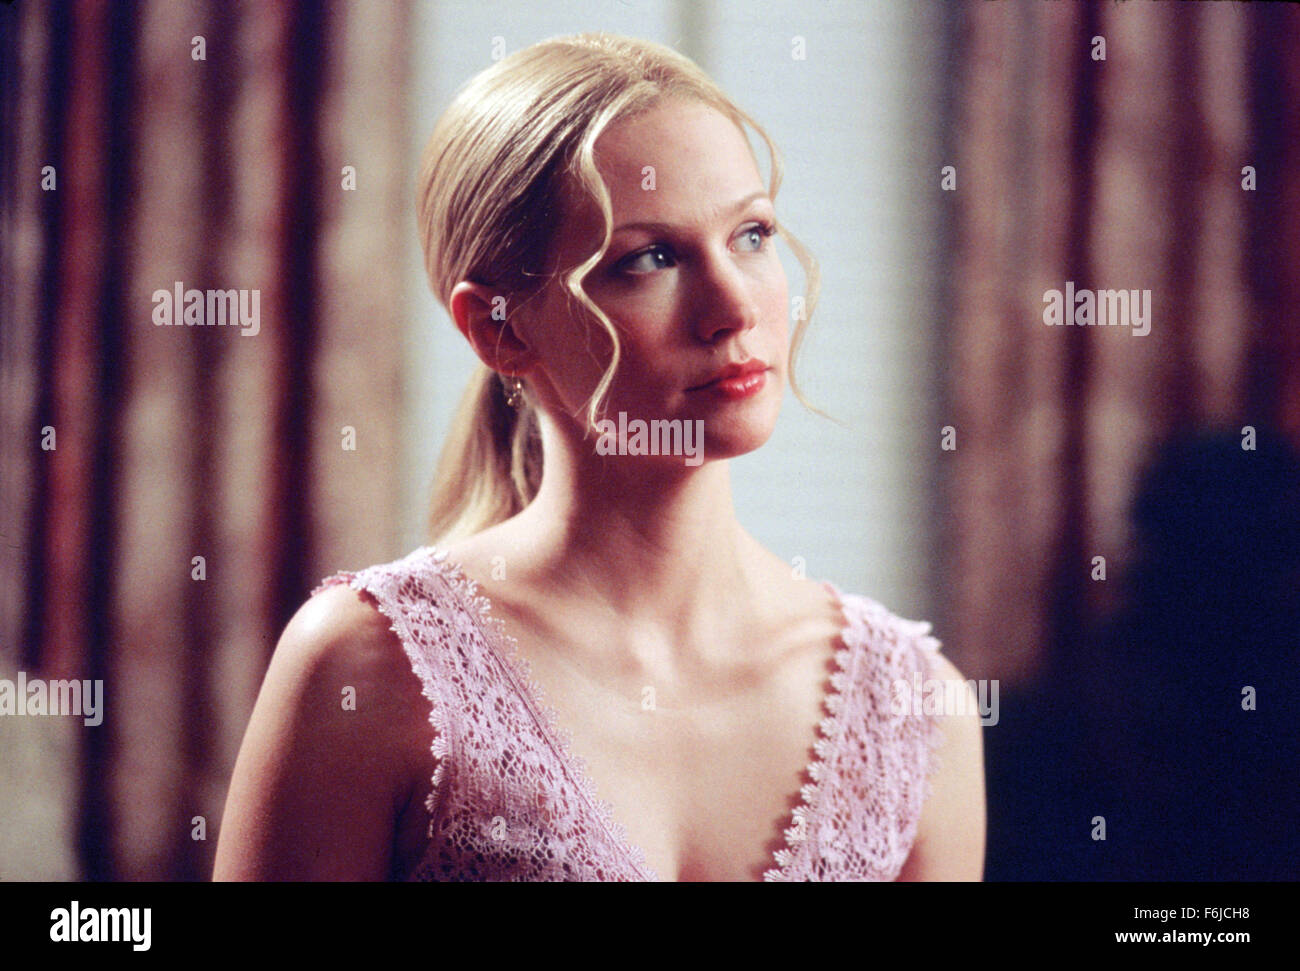 RELEASE DATE: July 24, 2003. MOVIE TITLE: American Wedding. STUDIO: Universal Studios. PLOT: The third film in the American Pie series deals with the wedding of Jim and Michelle and the gathering of their families and friends, including Jim's old friends from high school and Michelle's little sister. PICTURED: JANUARY JONES as Cadence Flaherty. Stock Photo